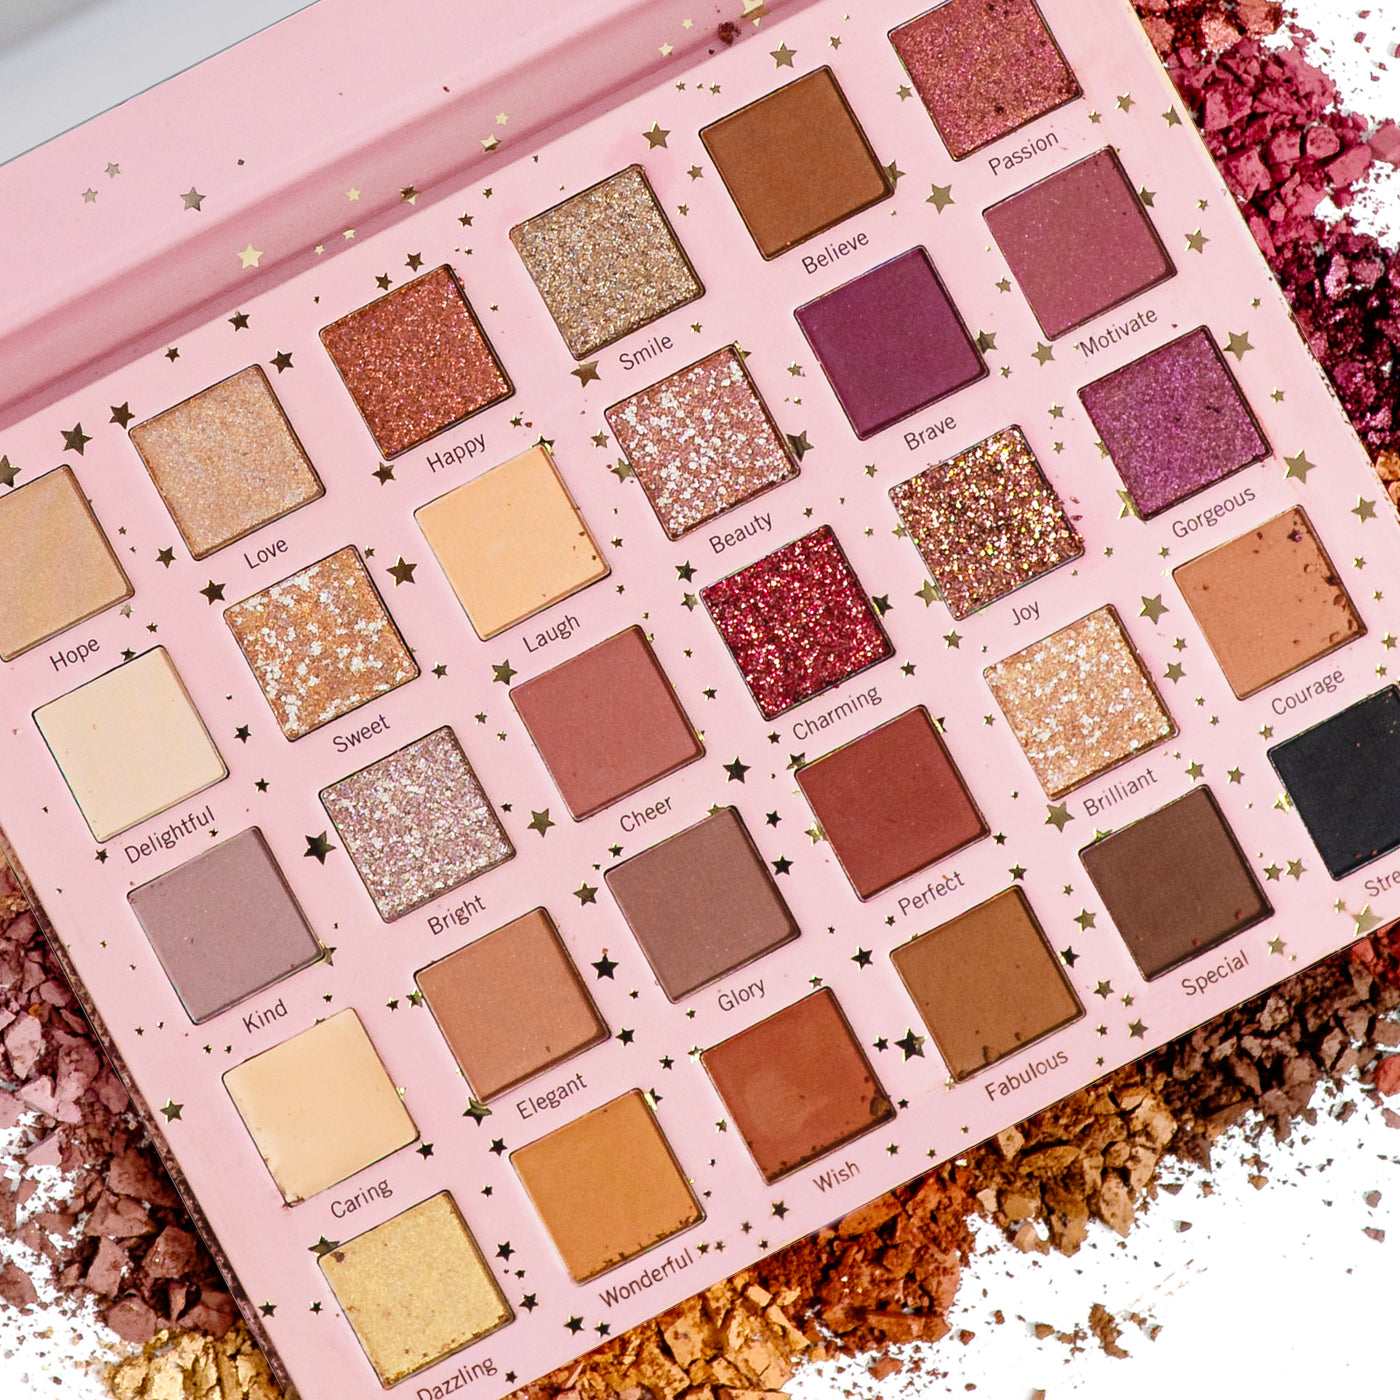 You Are My Dream 30 Color Eyeshadow Palette